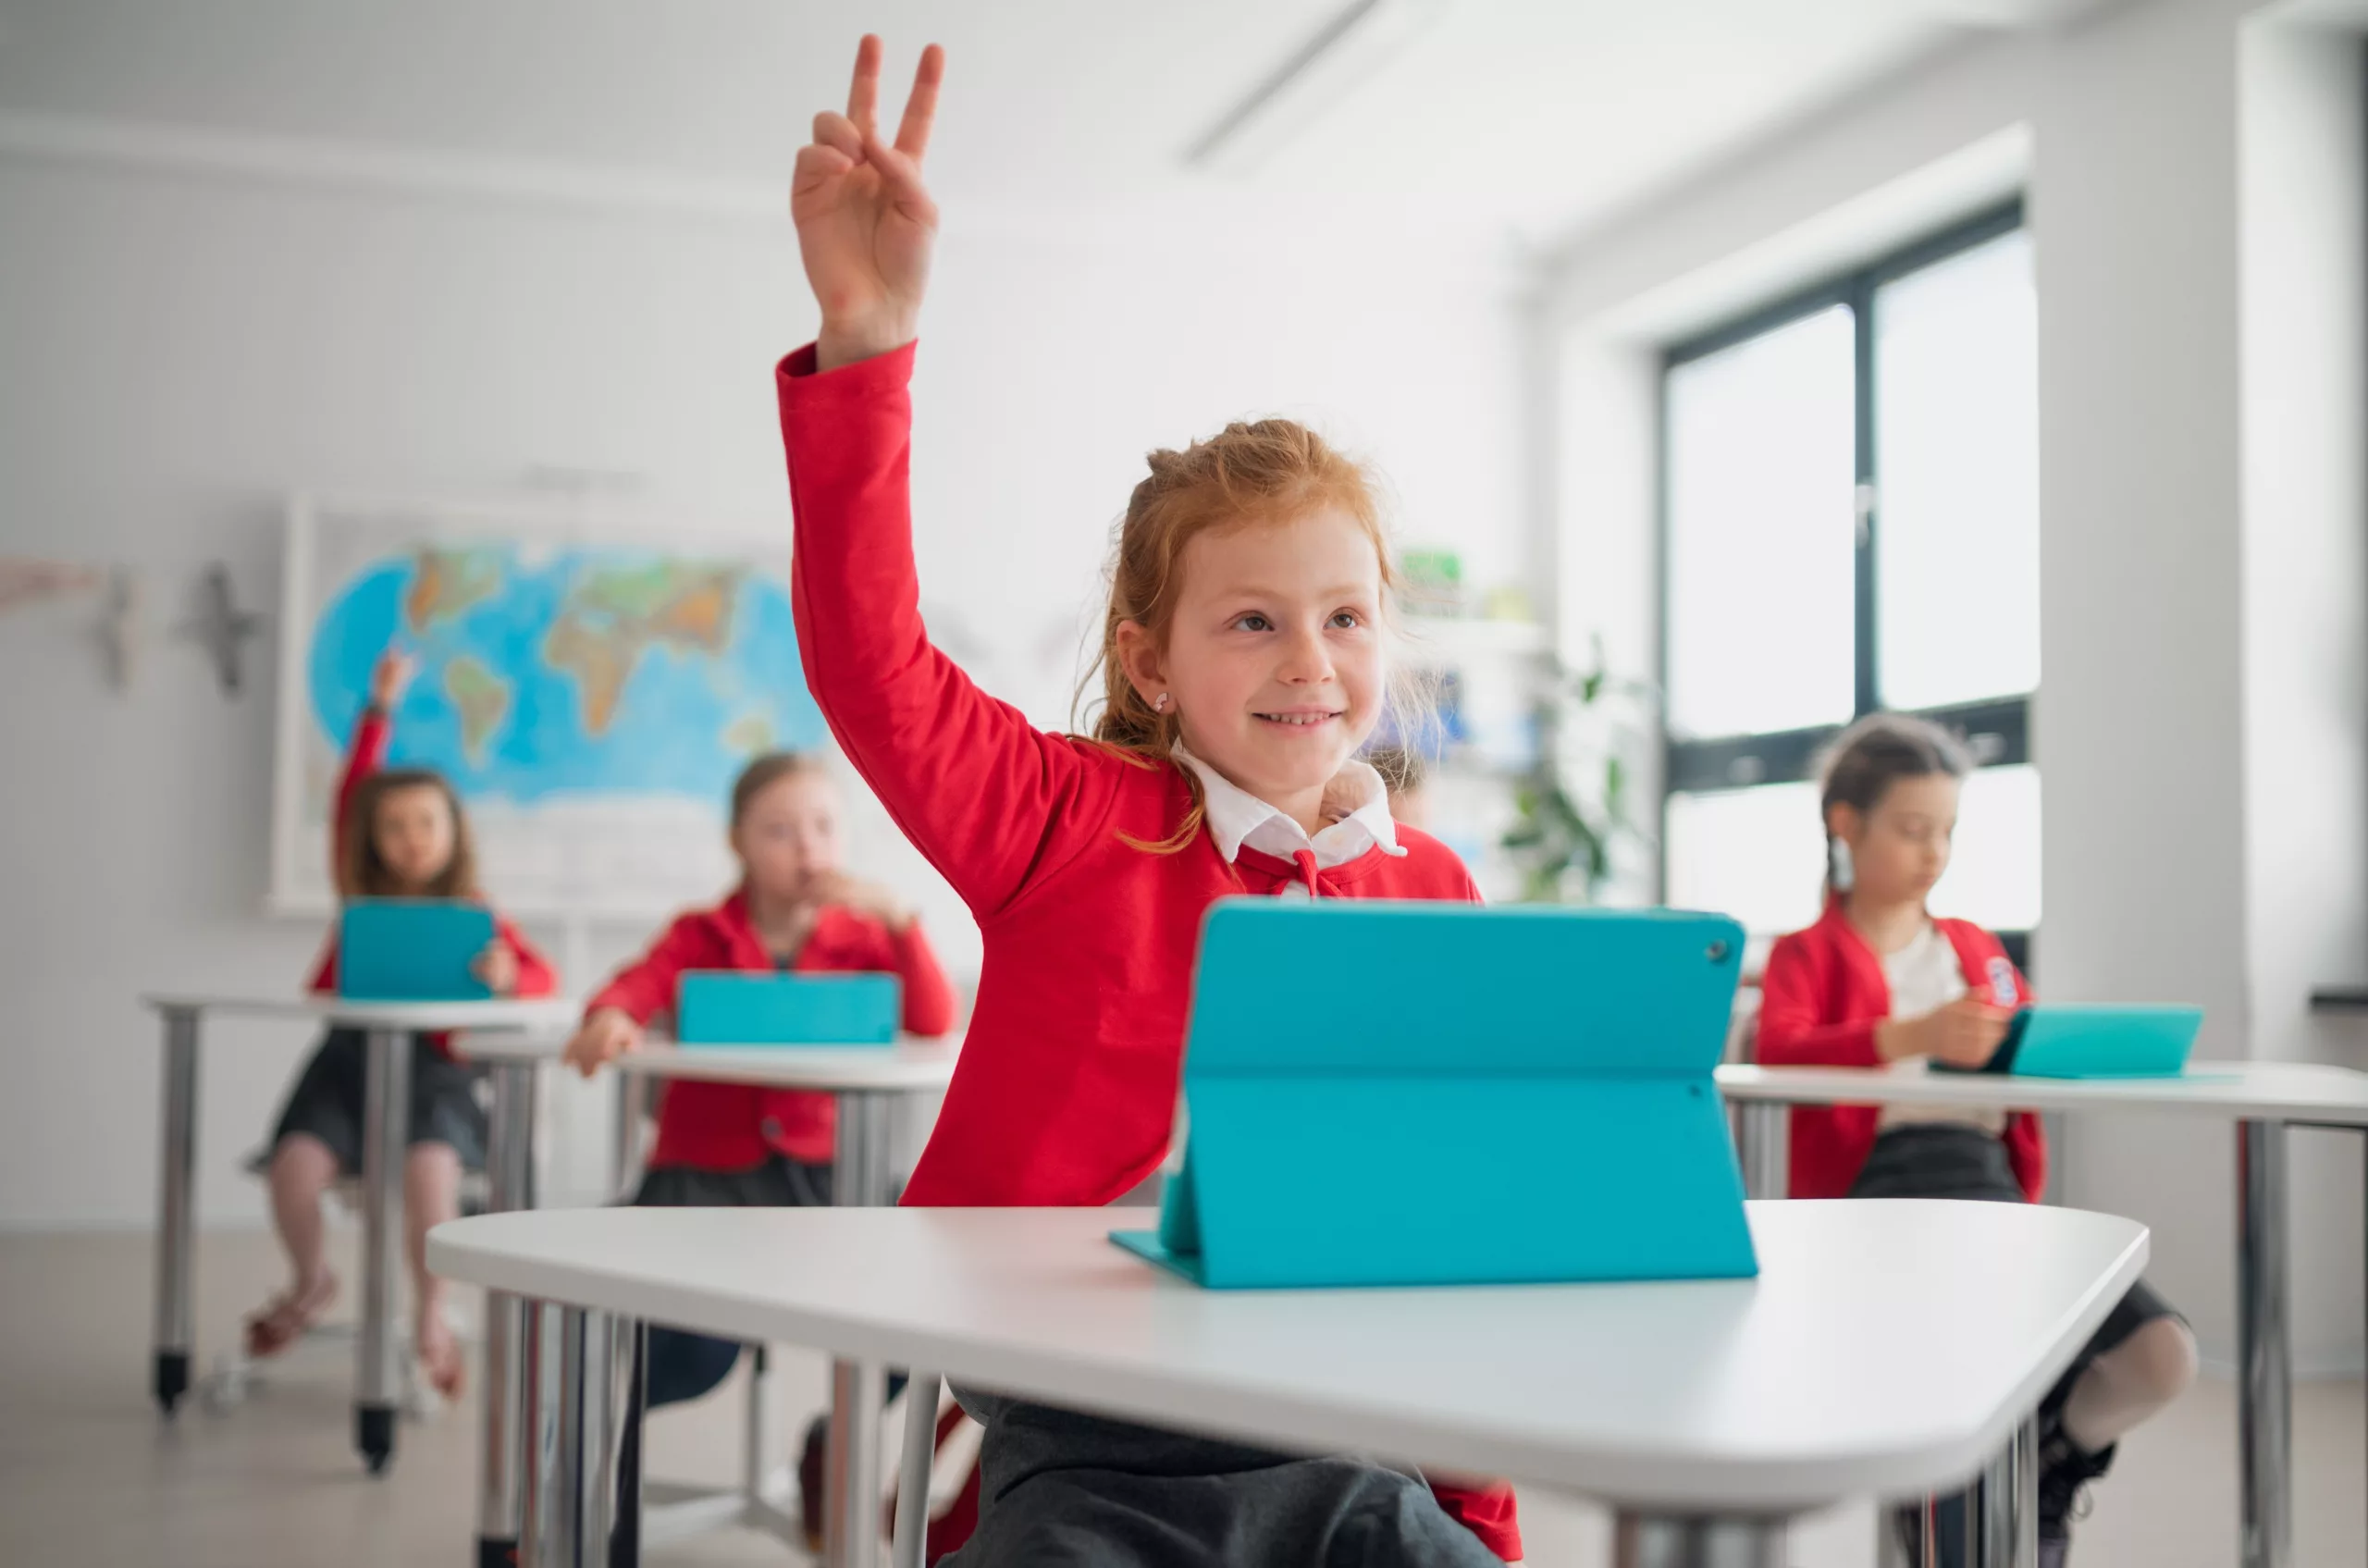 Girl in red jumper holding her hand up in school education classroom